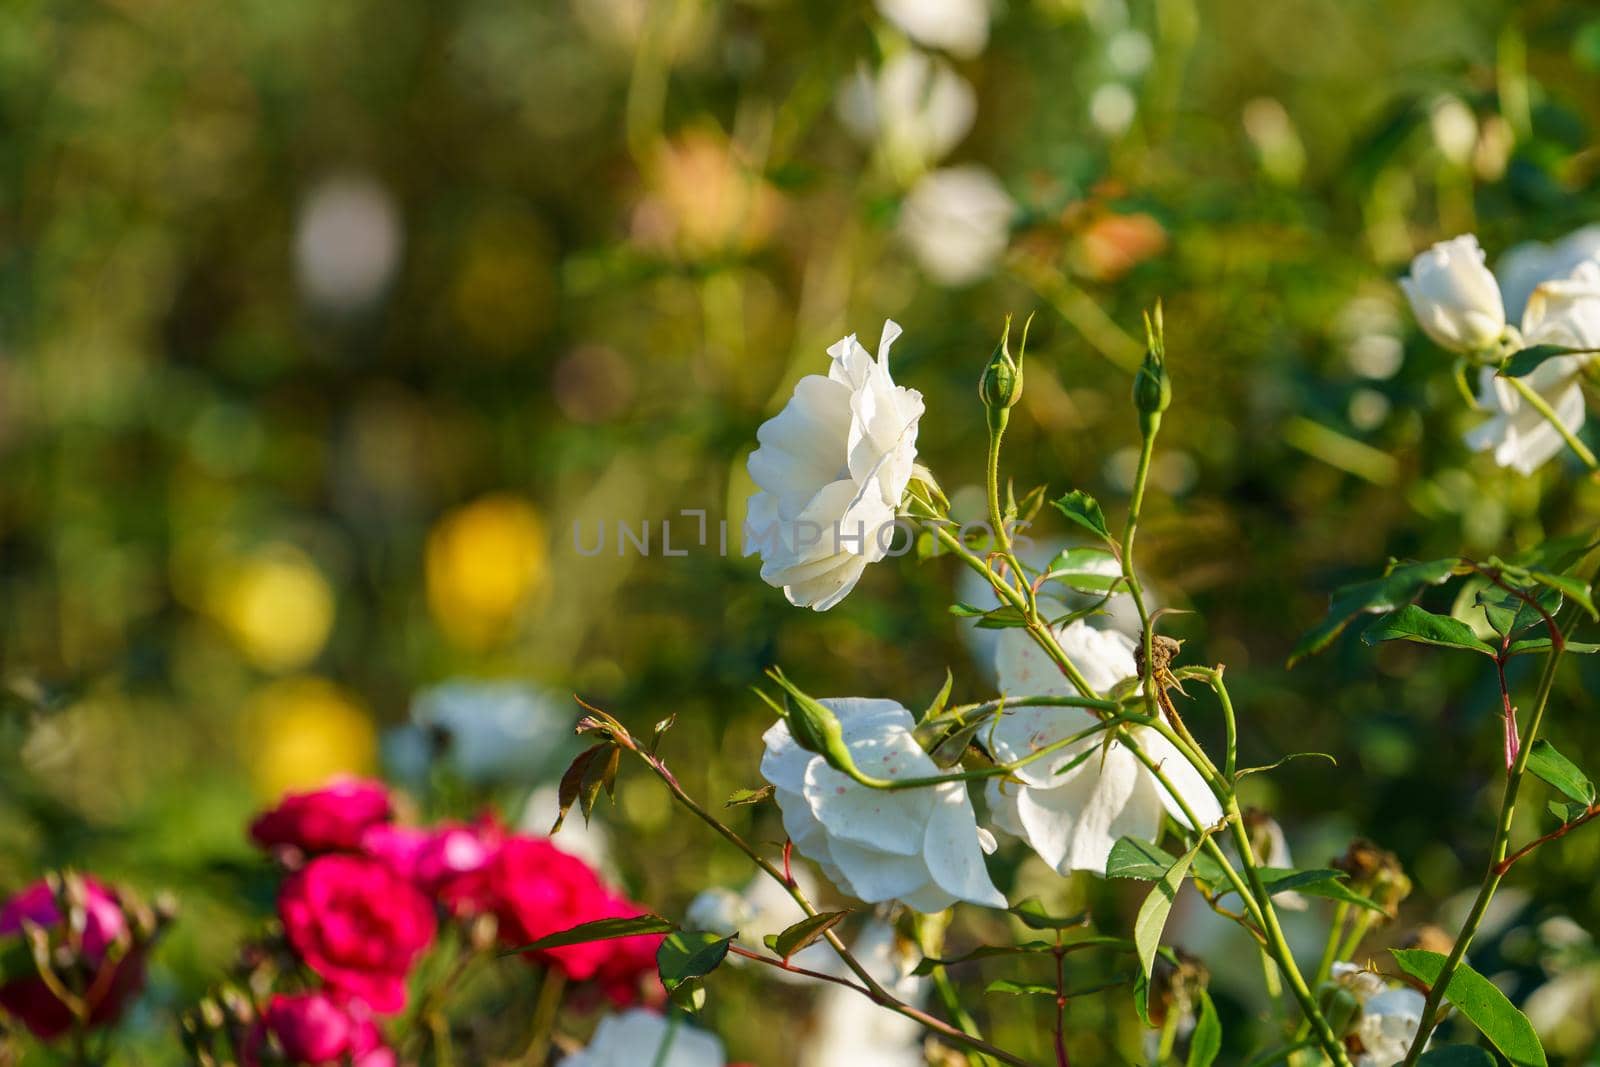 White roses in a flowerbed in the garden by Vvicca